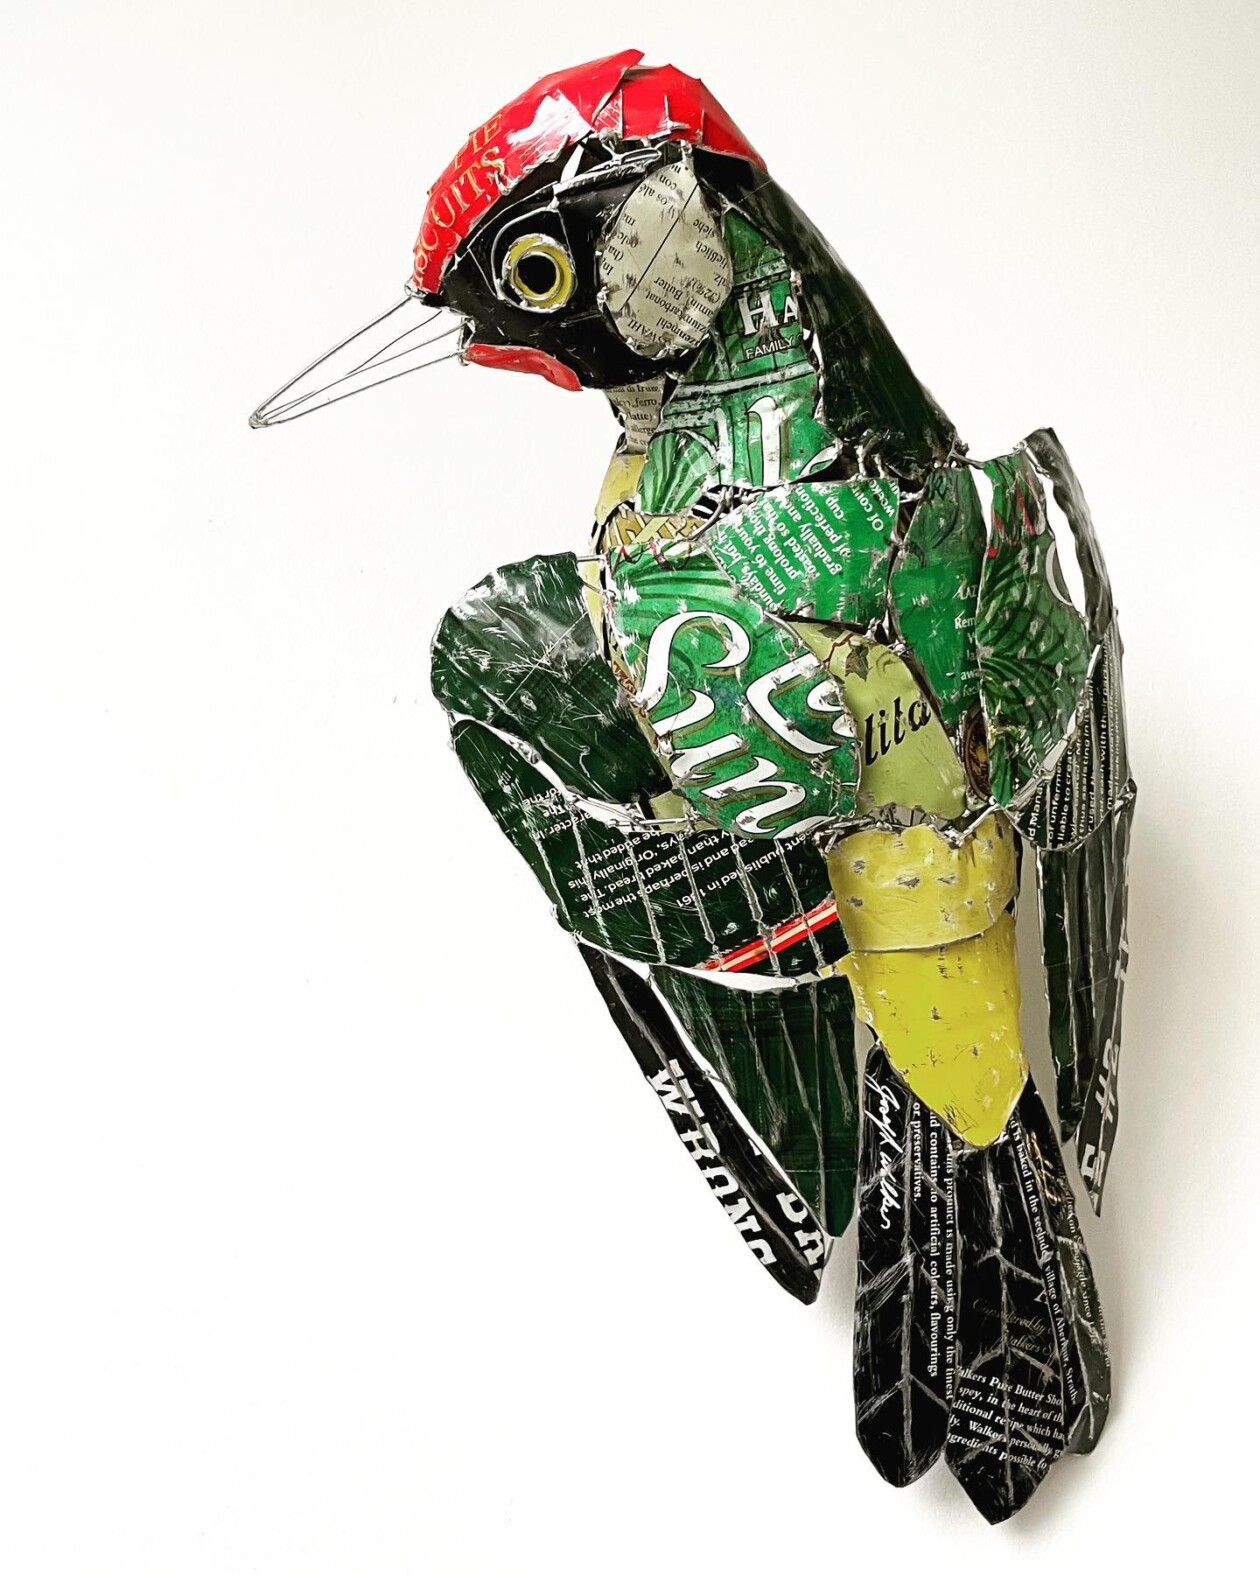 Bird Sculptures Made From Recycled Metal Scraps By Barbara Franc (10)